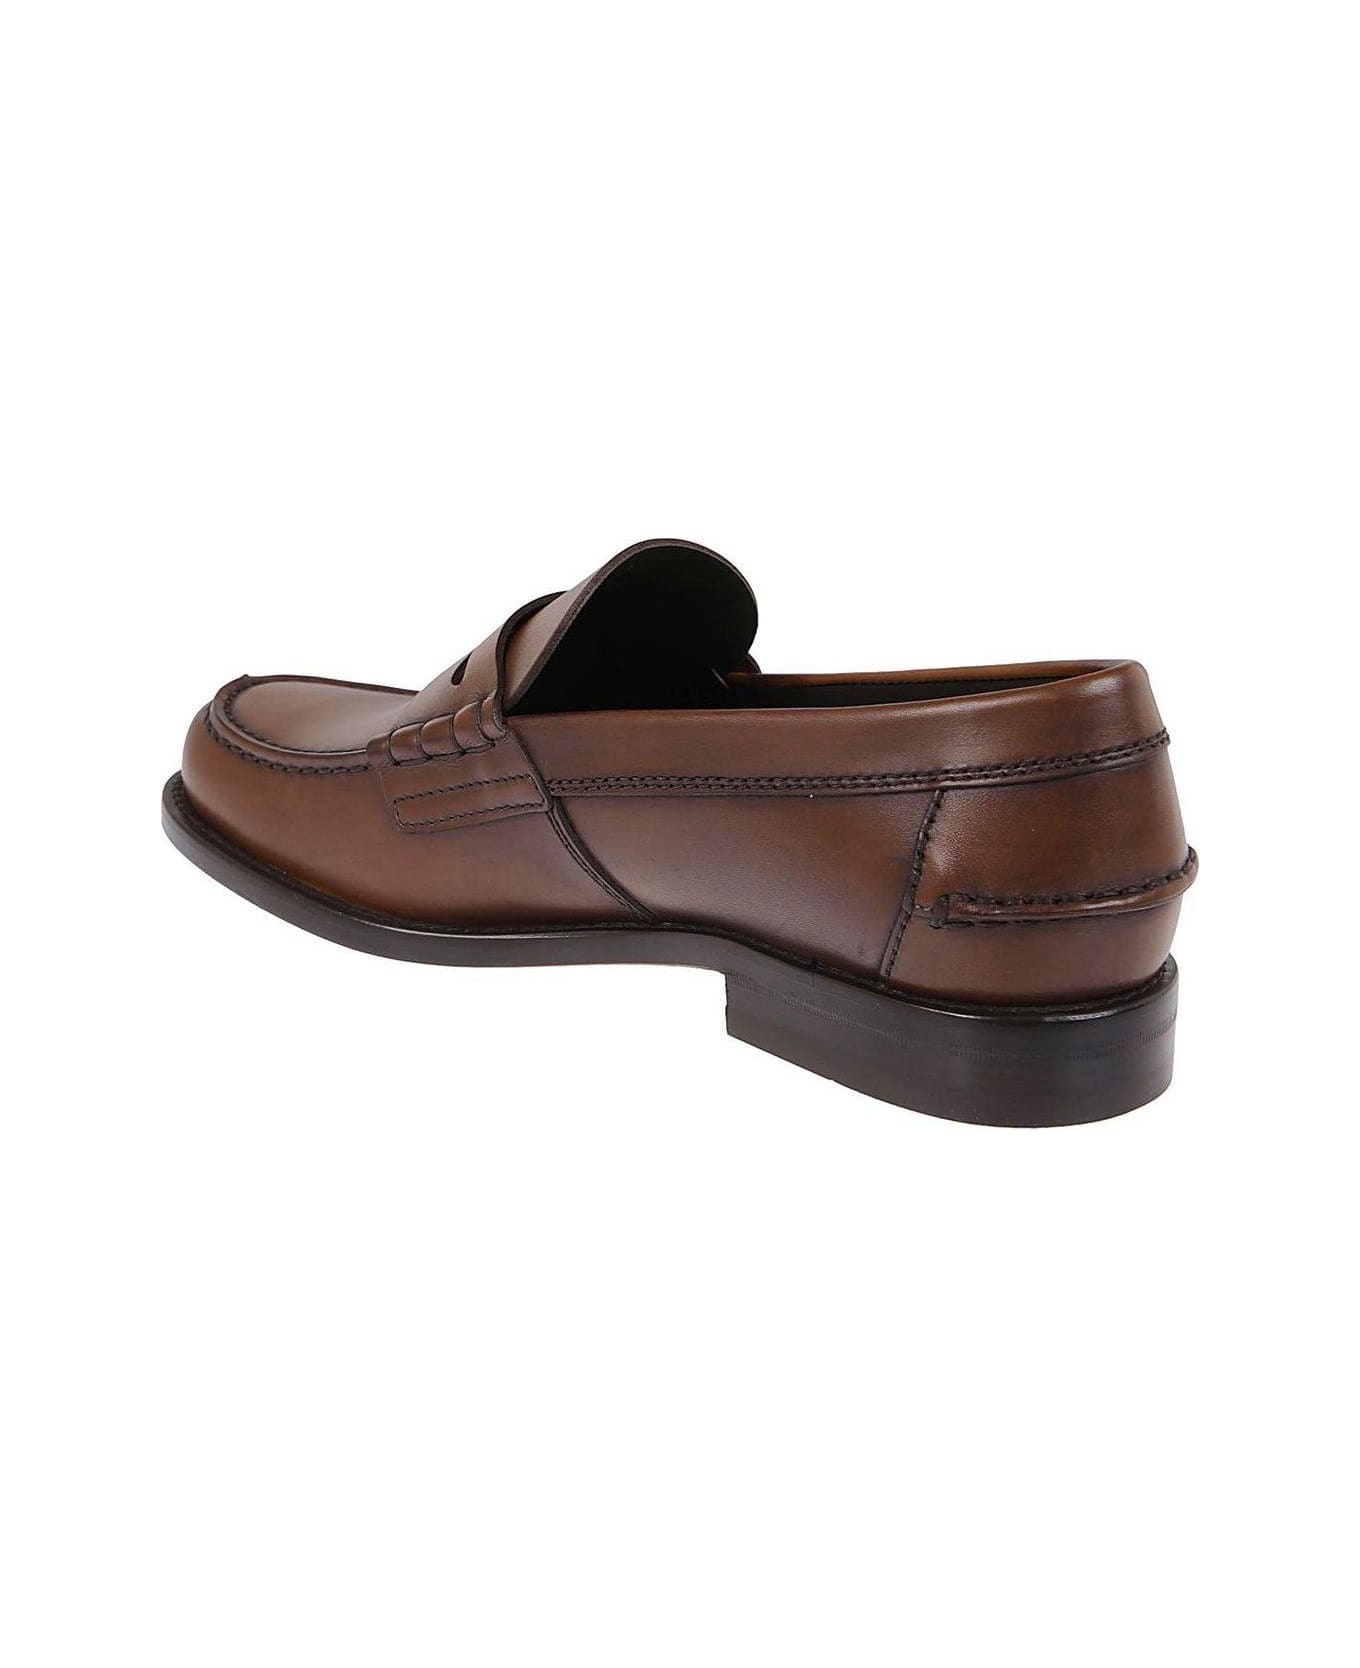 Tod's Penny Bar Moccasins - Brown